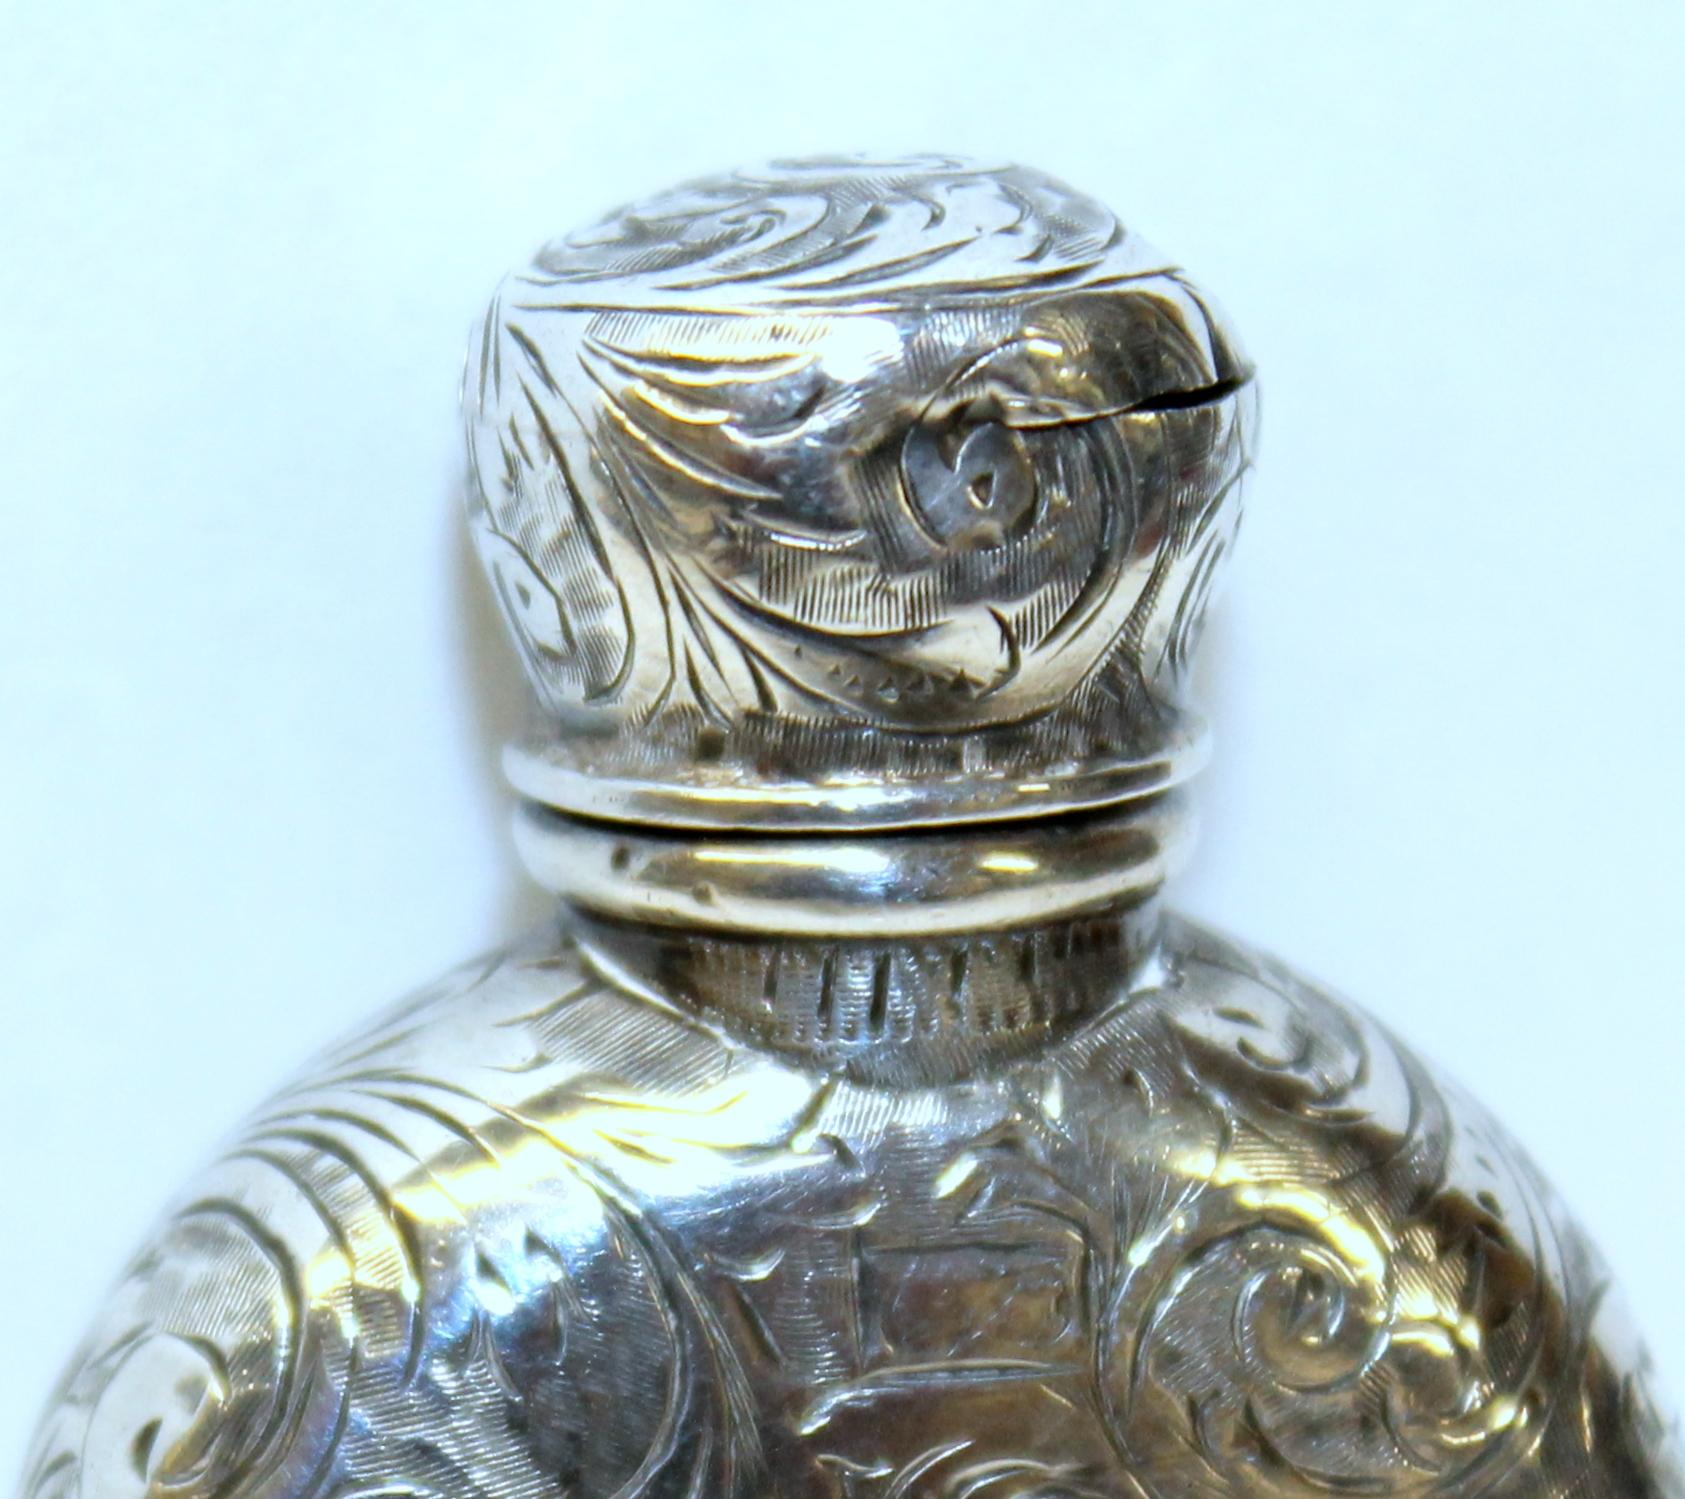 Engraved Antique English Victorian Hallmarked Sterling Silver Scent/Perfume Bottle